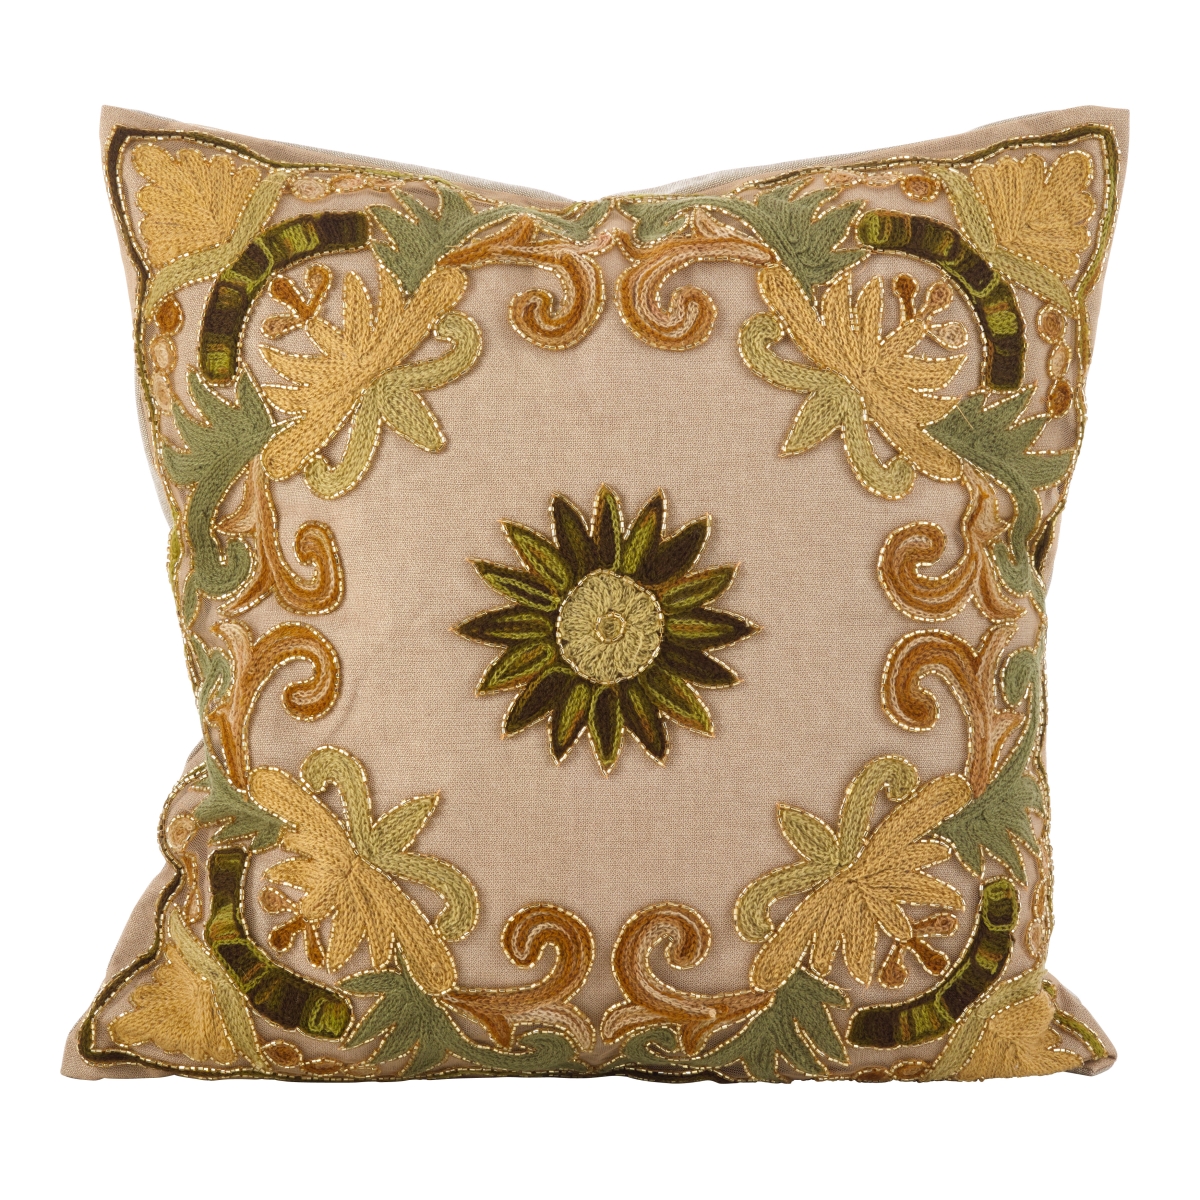 An02.g18s 18 In. Square Embroidered Floral Design Beaded Cotton Poly Filled Throw Pillow, Green